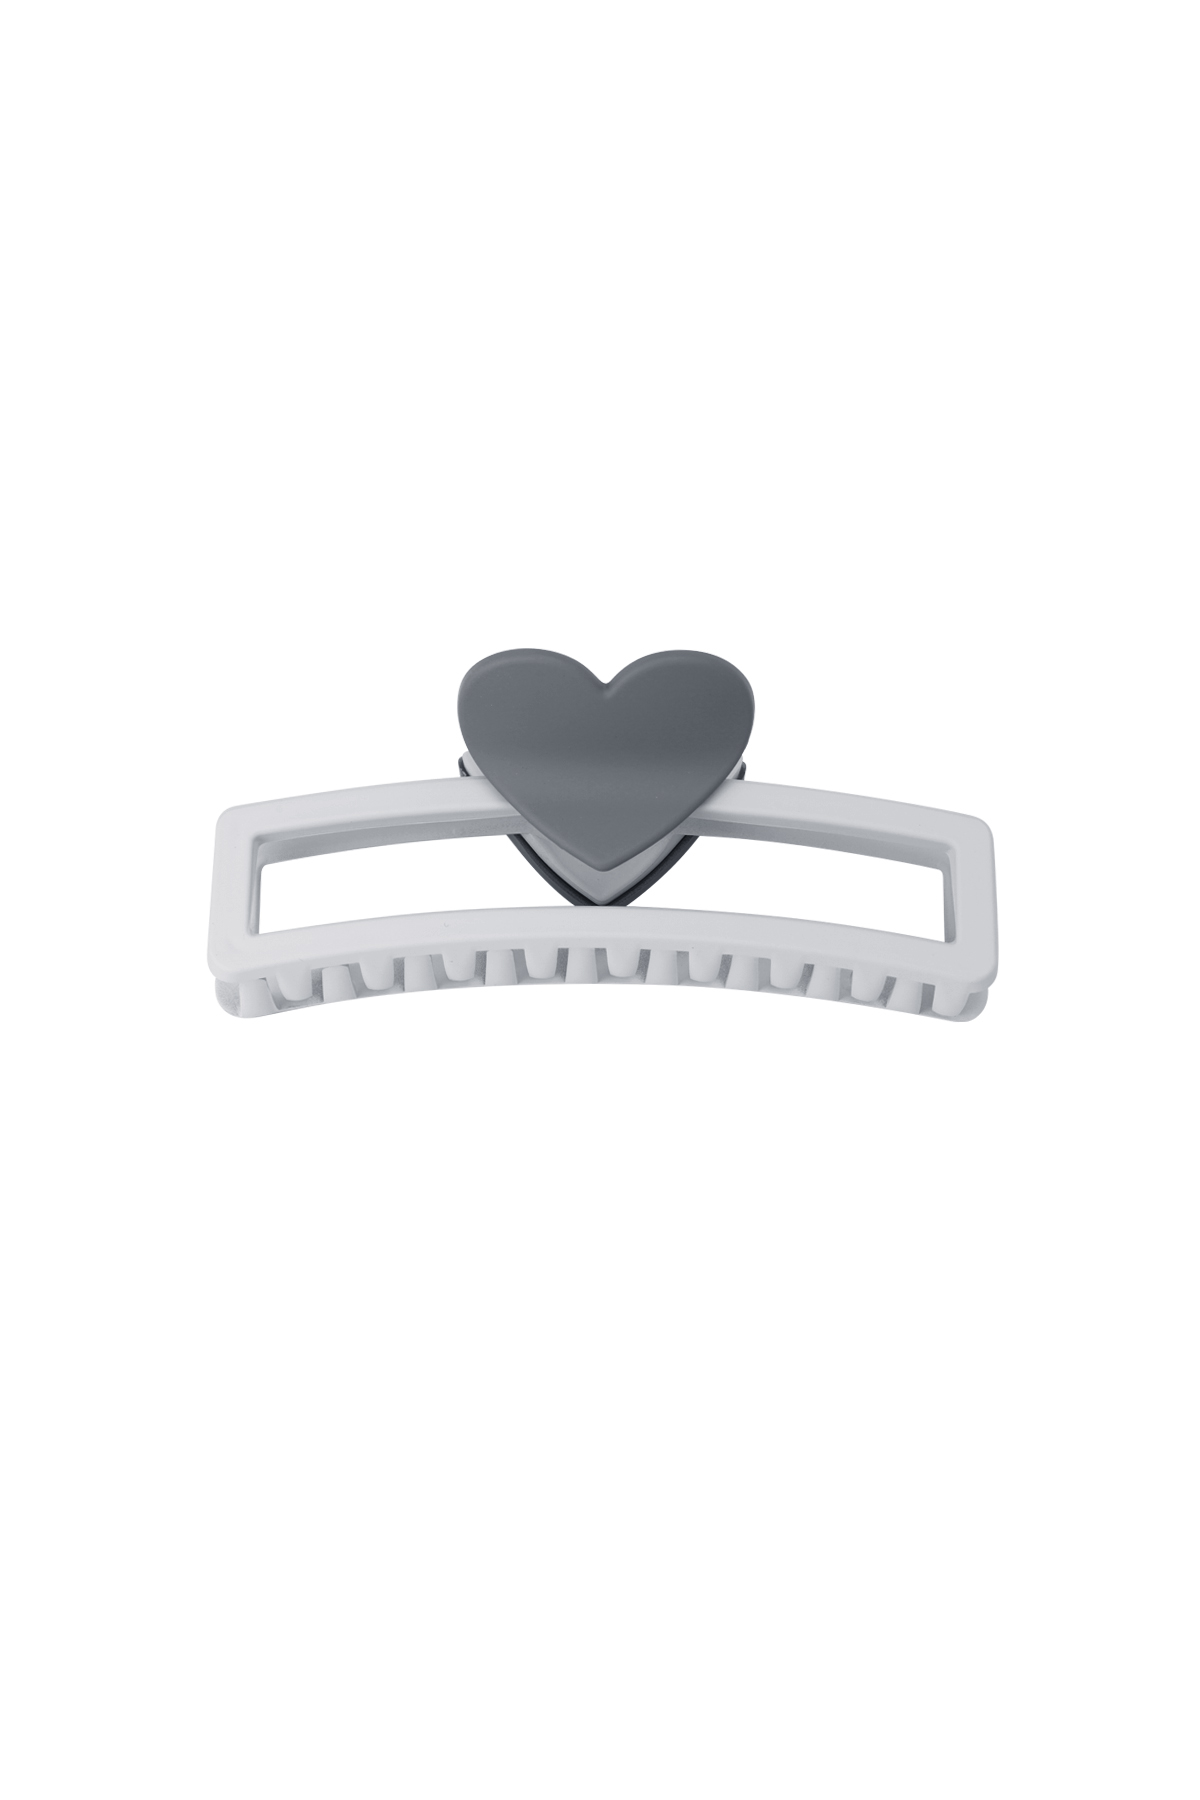 hair clip with heart-shaped handle - gray 